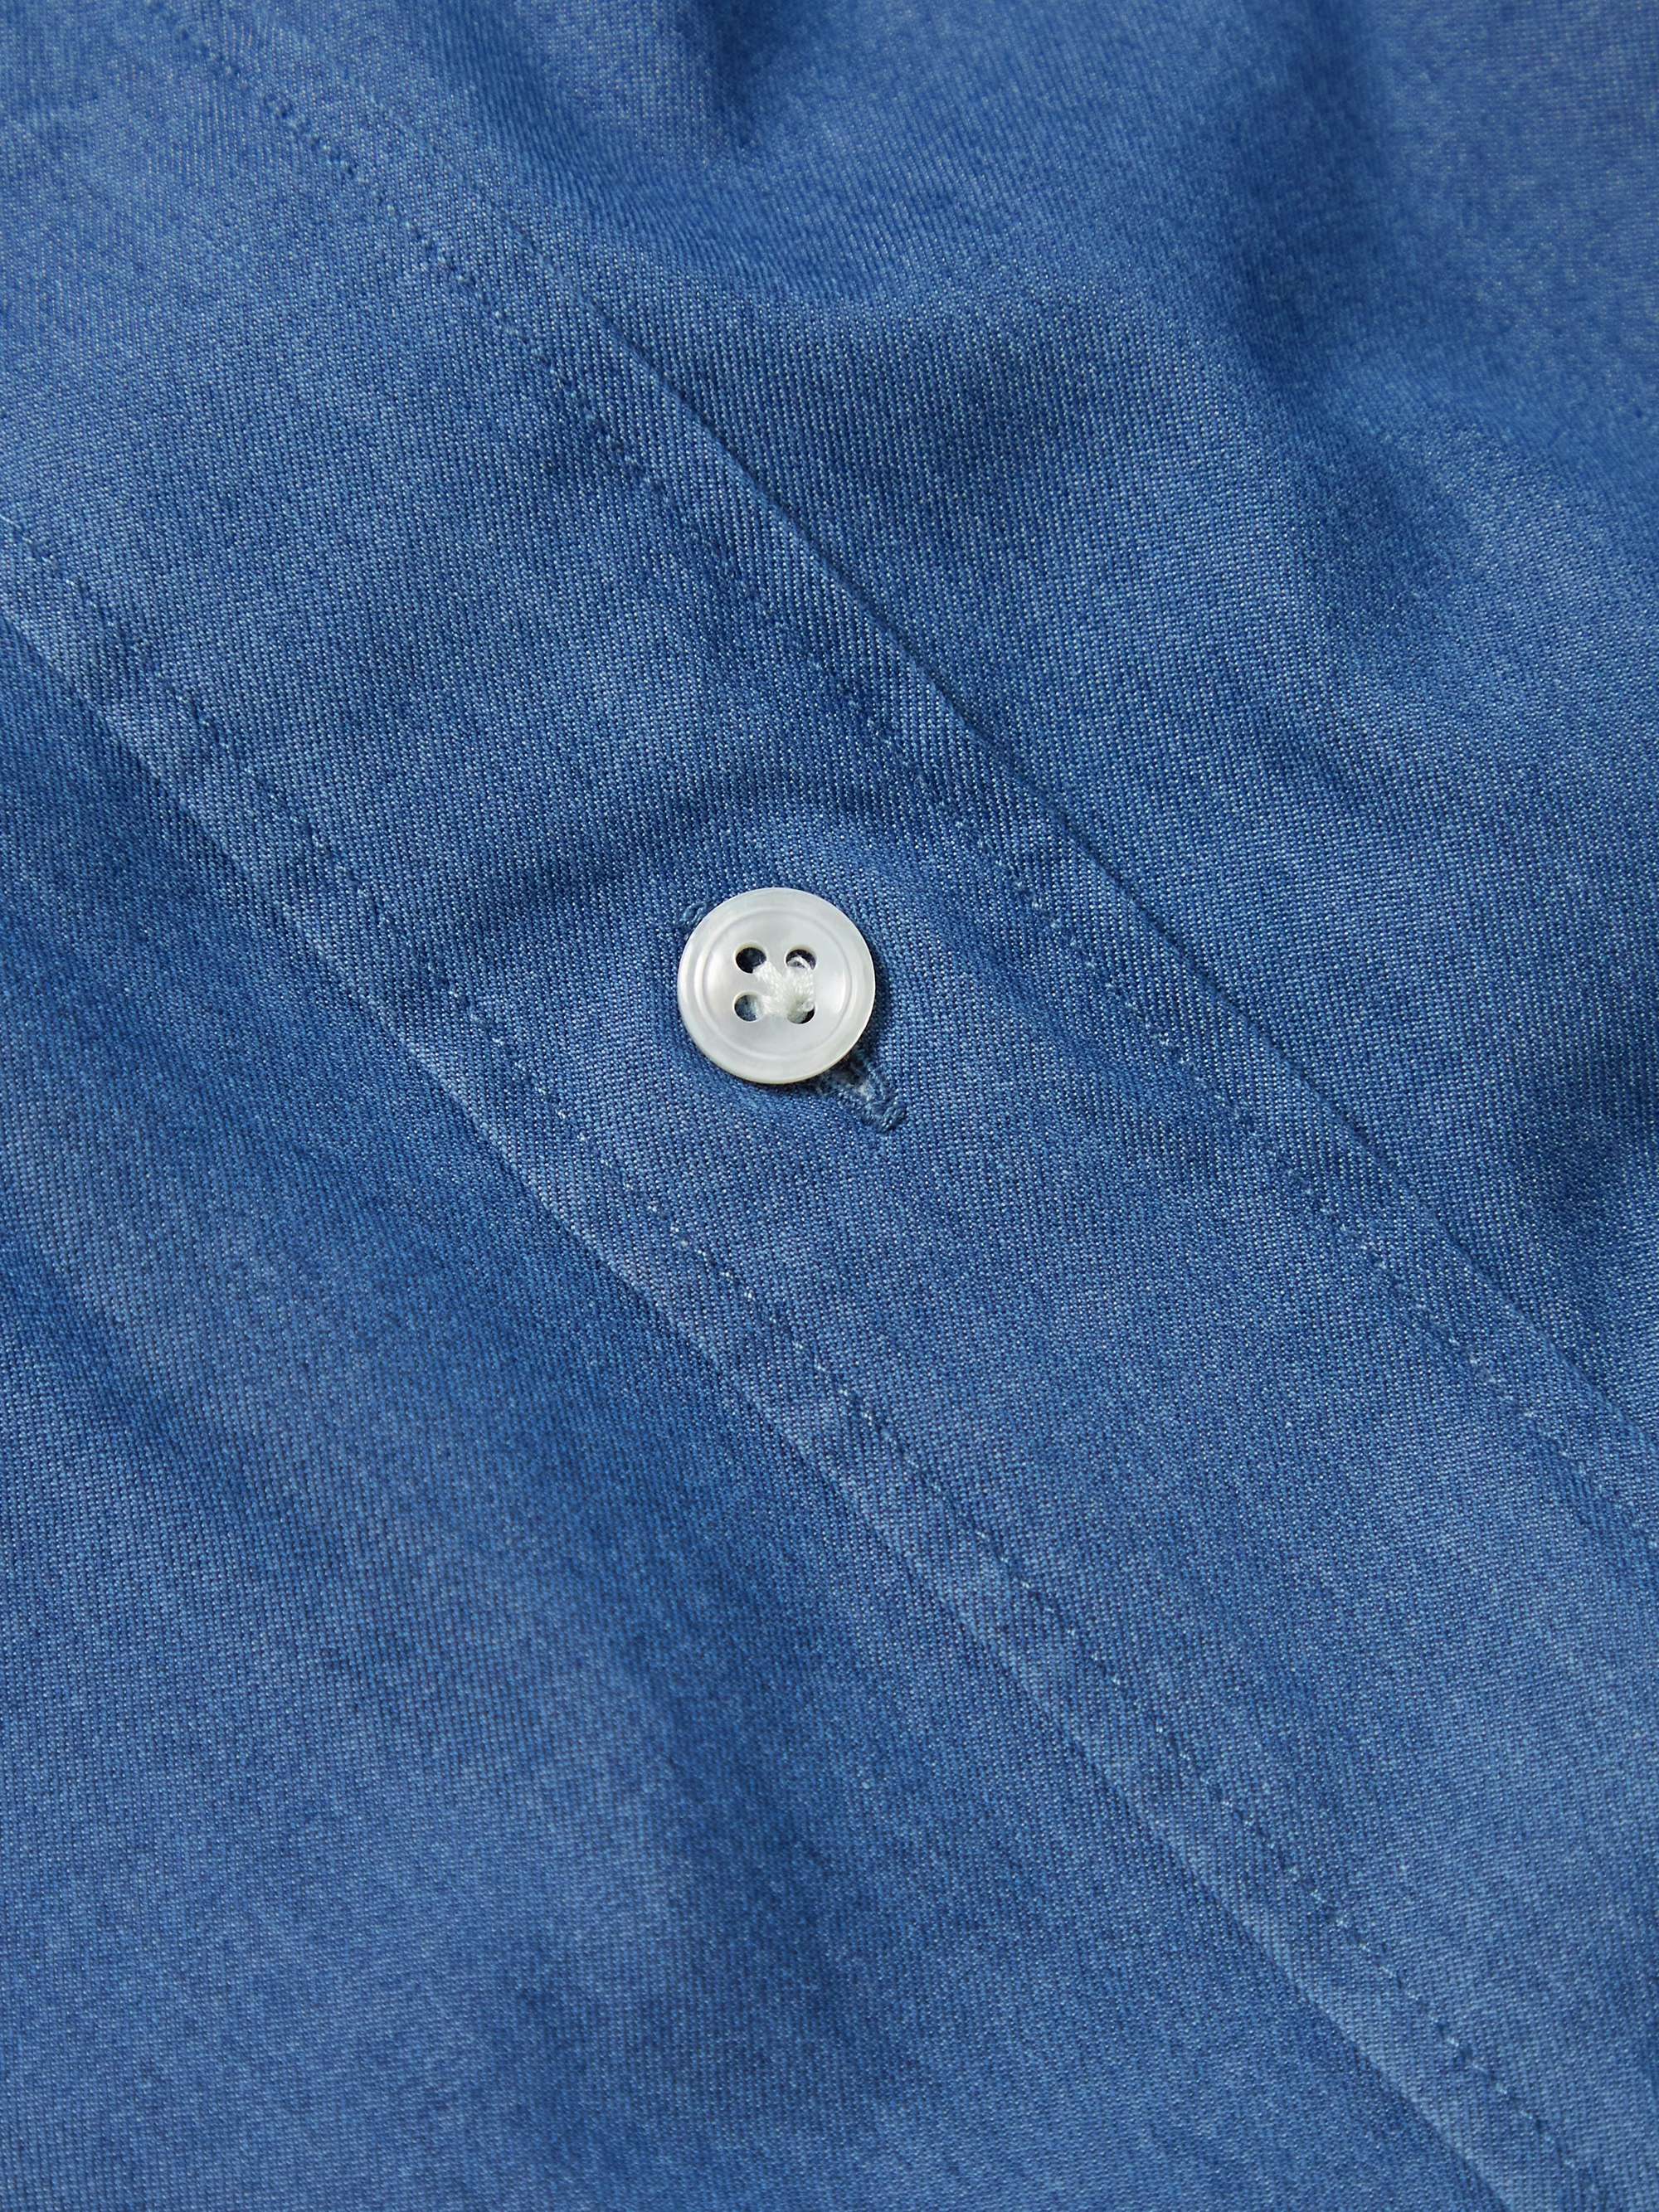 THOM SWEENEY Button-Down Collar Cotton-Chambray Shirt